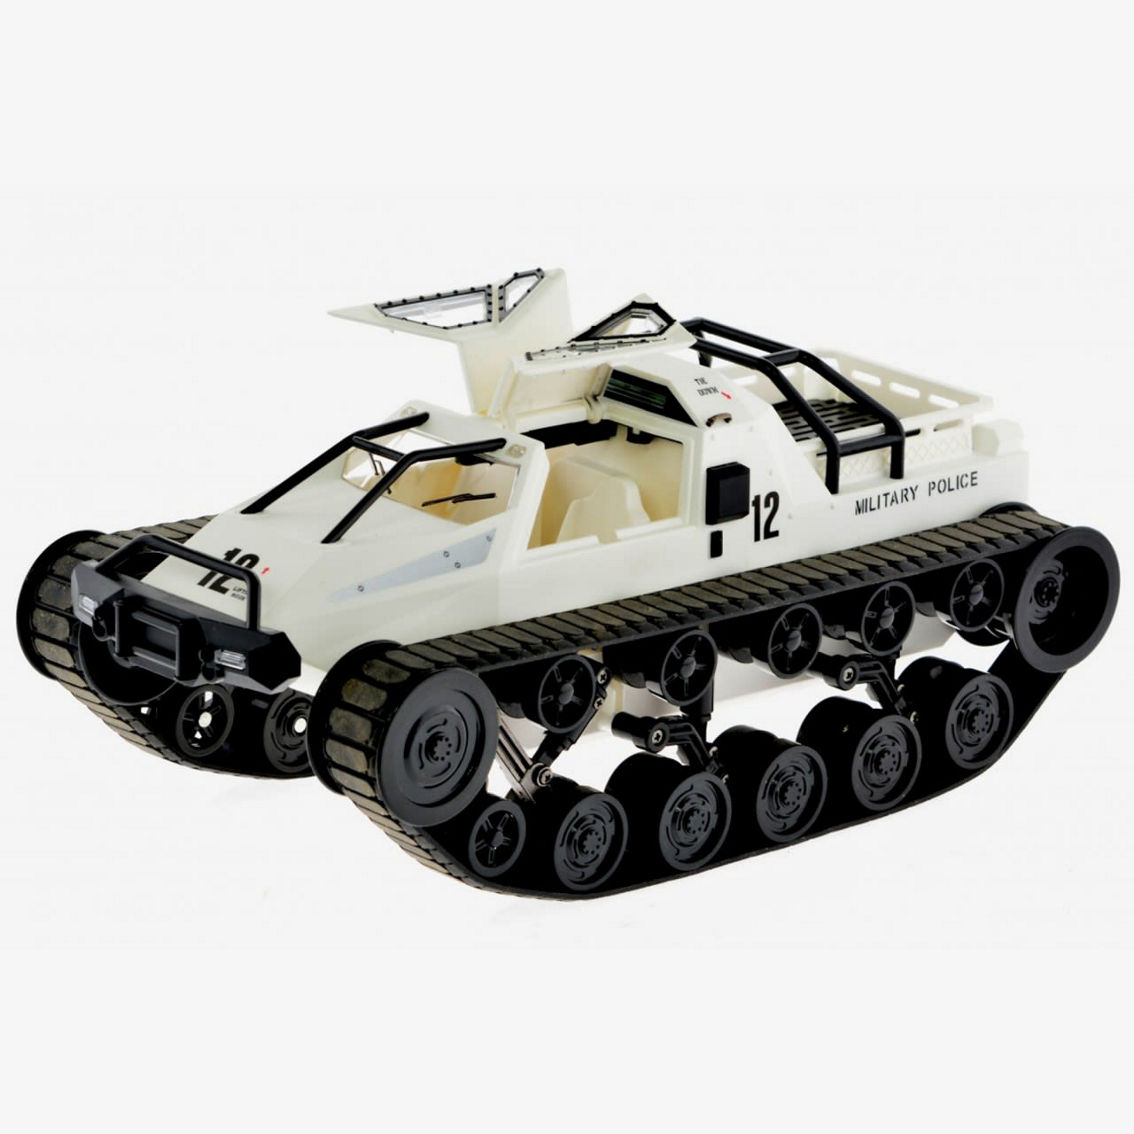 CIS-2601-G Ripsaw tank with top lights  - Gray - Image 3 of 5